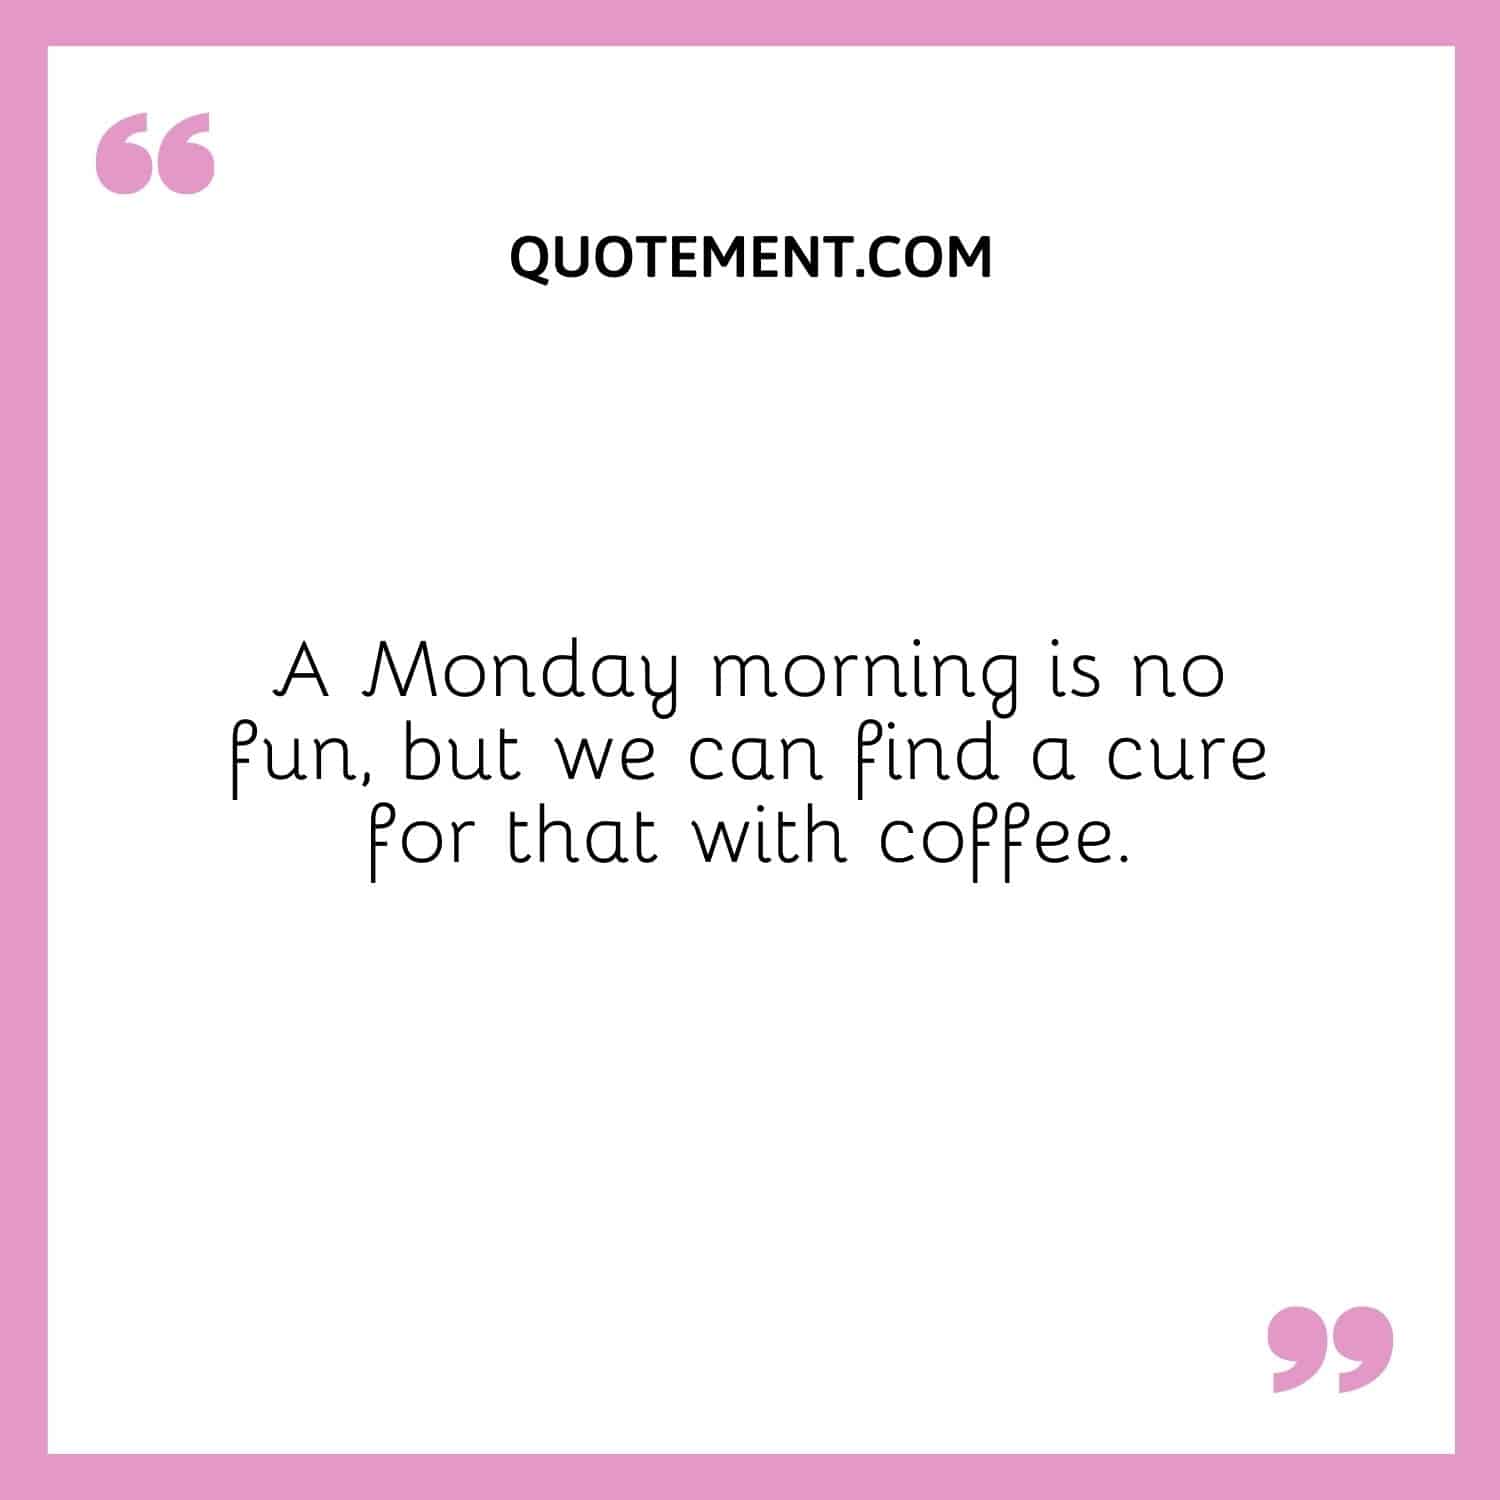 A Monday morning is no fun, but we can find a cure for that with coffee.